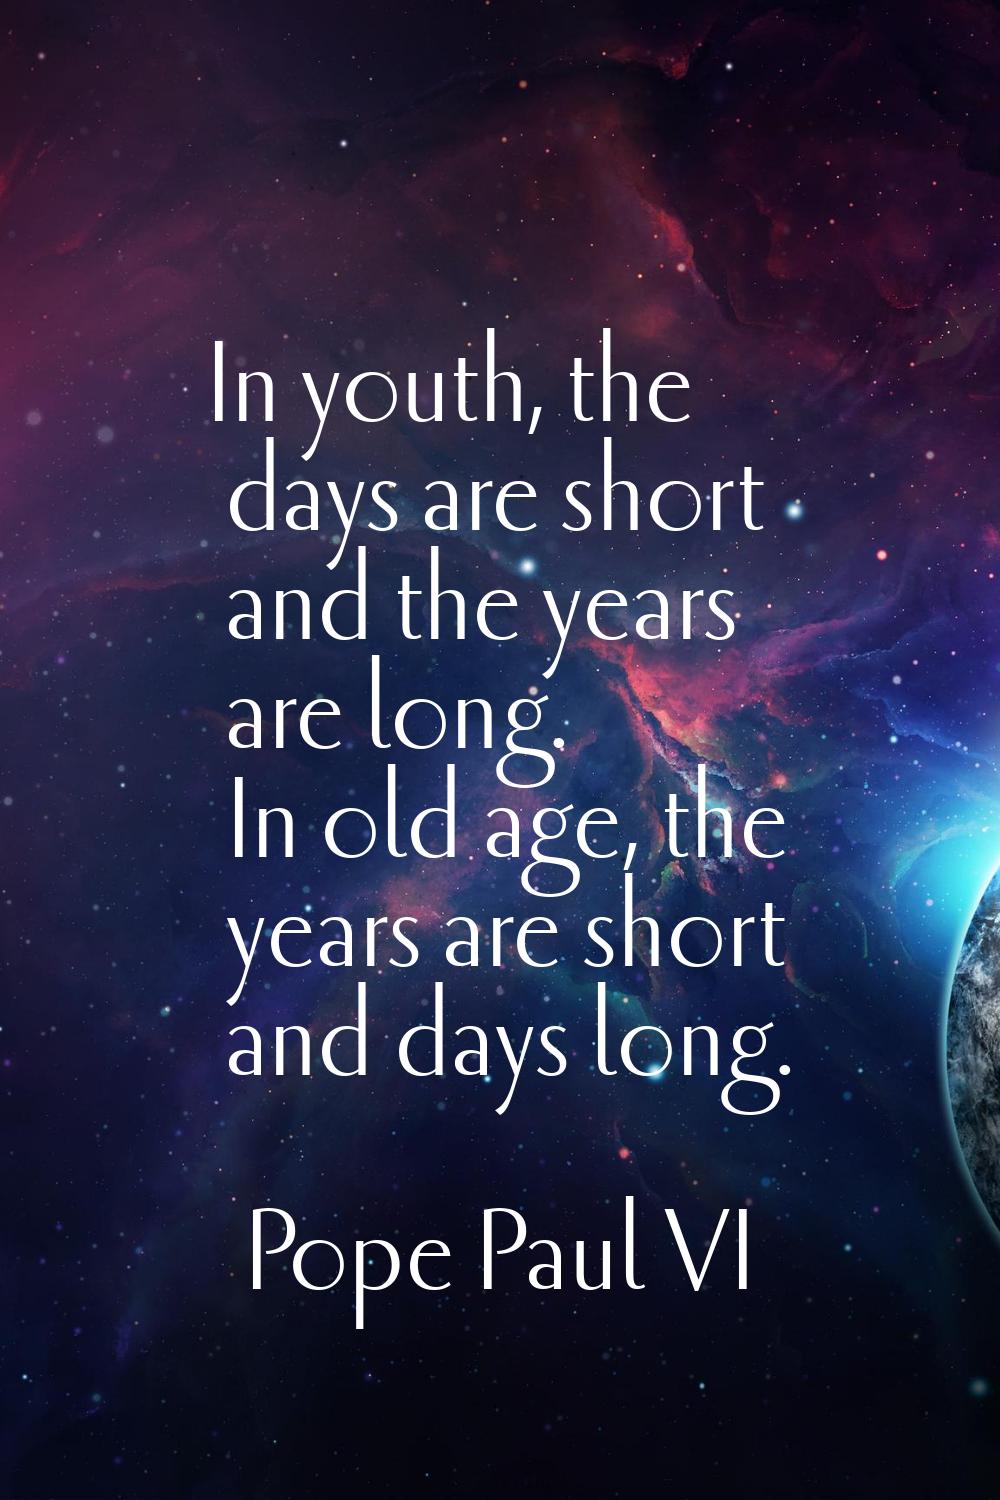 In youth, the days are short and the years are long. In old age, the years are short and days long.